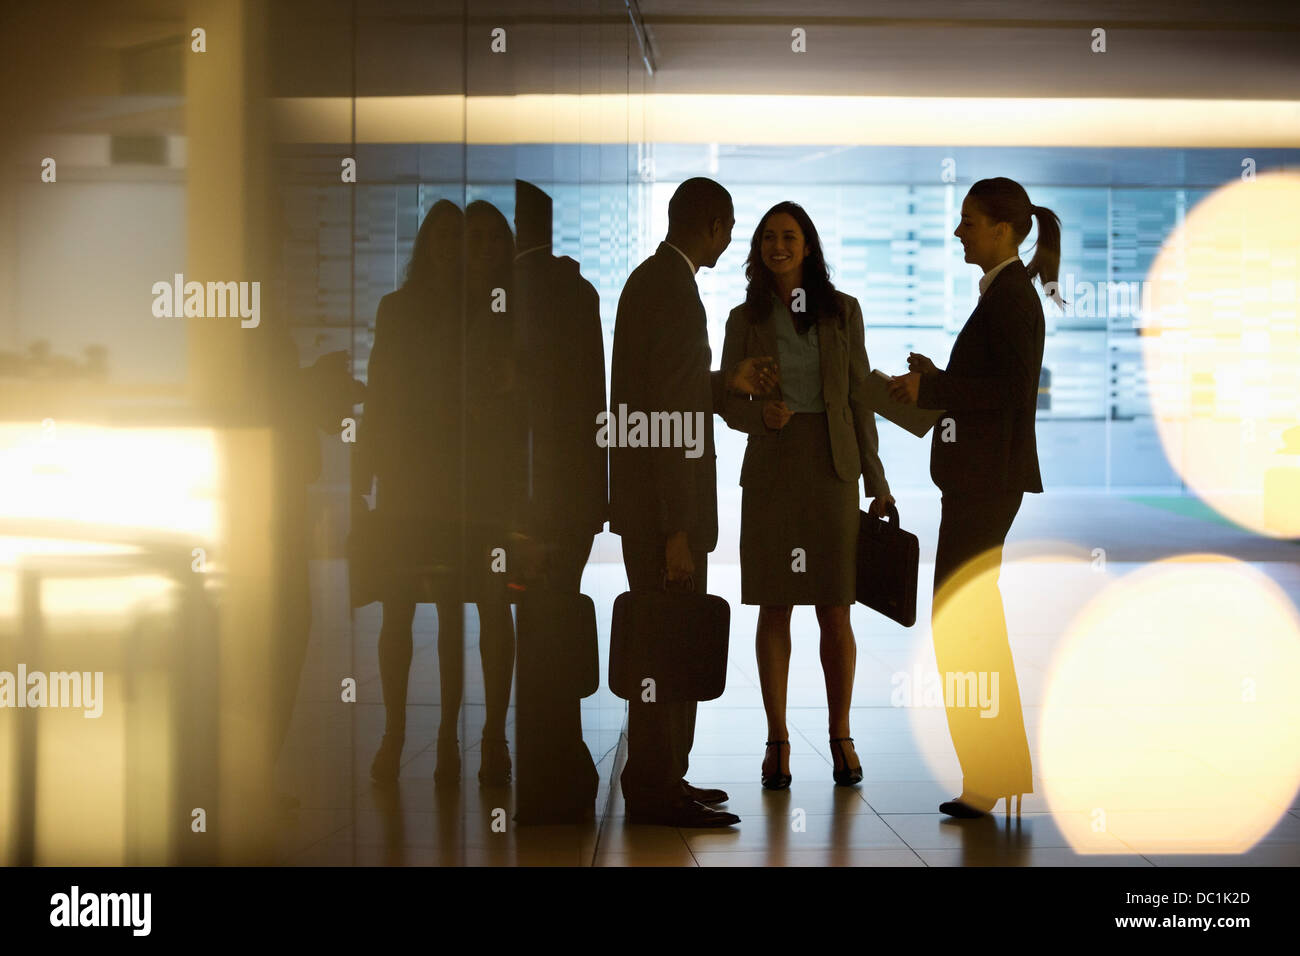 Business people talking in lobby Banque D'Images